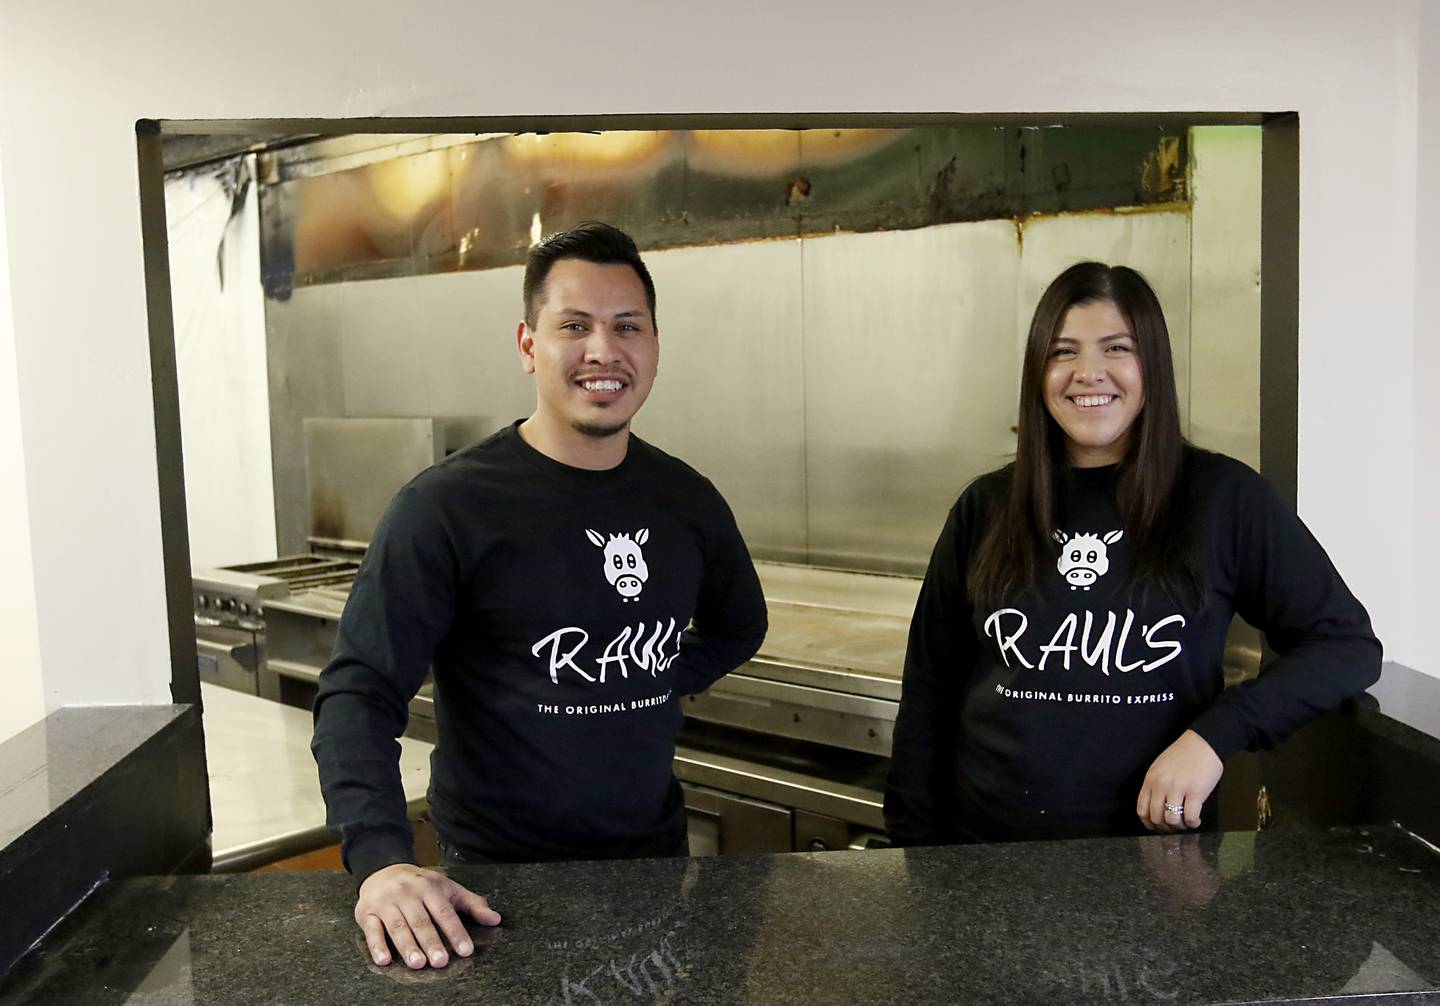 Raul Briseno Jr., and his sister Alexandra Strohmaier, the children of the late Raul Briseno Sr., stand behind the counter of their father’s first restaurant on Tuesday, Feb. 22, 2022. They are opening a restaurant in the original location where their dad opened up his first Raul’s Burrito Express in Wauconda. It has been 21 years since his father was murdered at the Burrito Express he owned in McHenry.